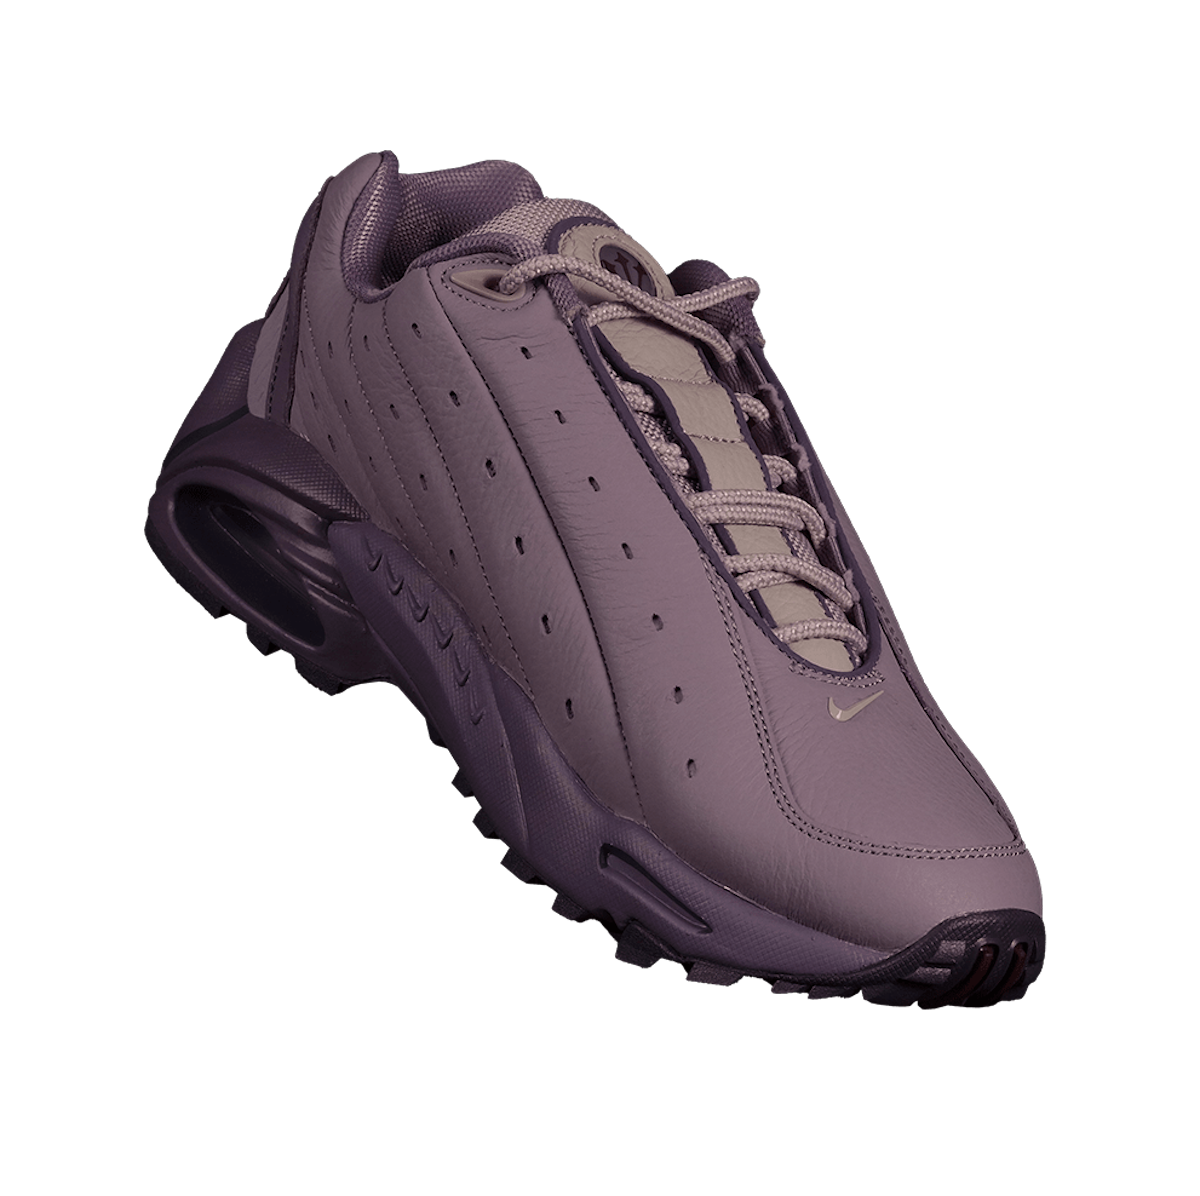 NOCTA Nike Hot Step Purple DH4692-500 Release Date Front